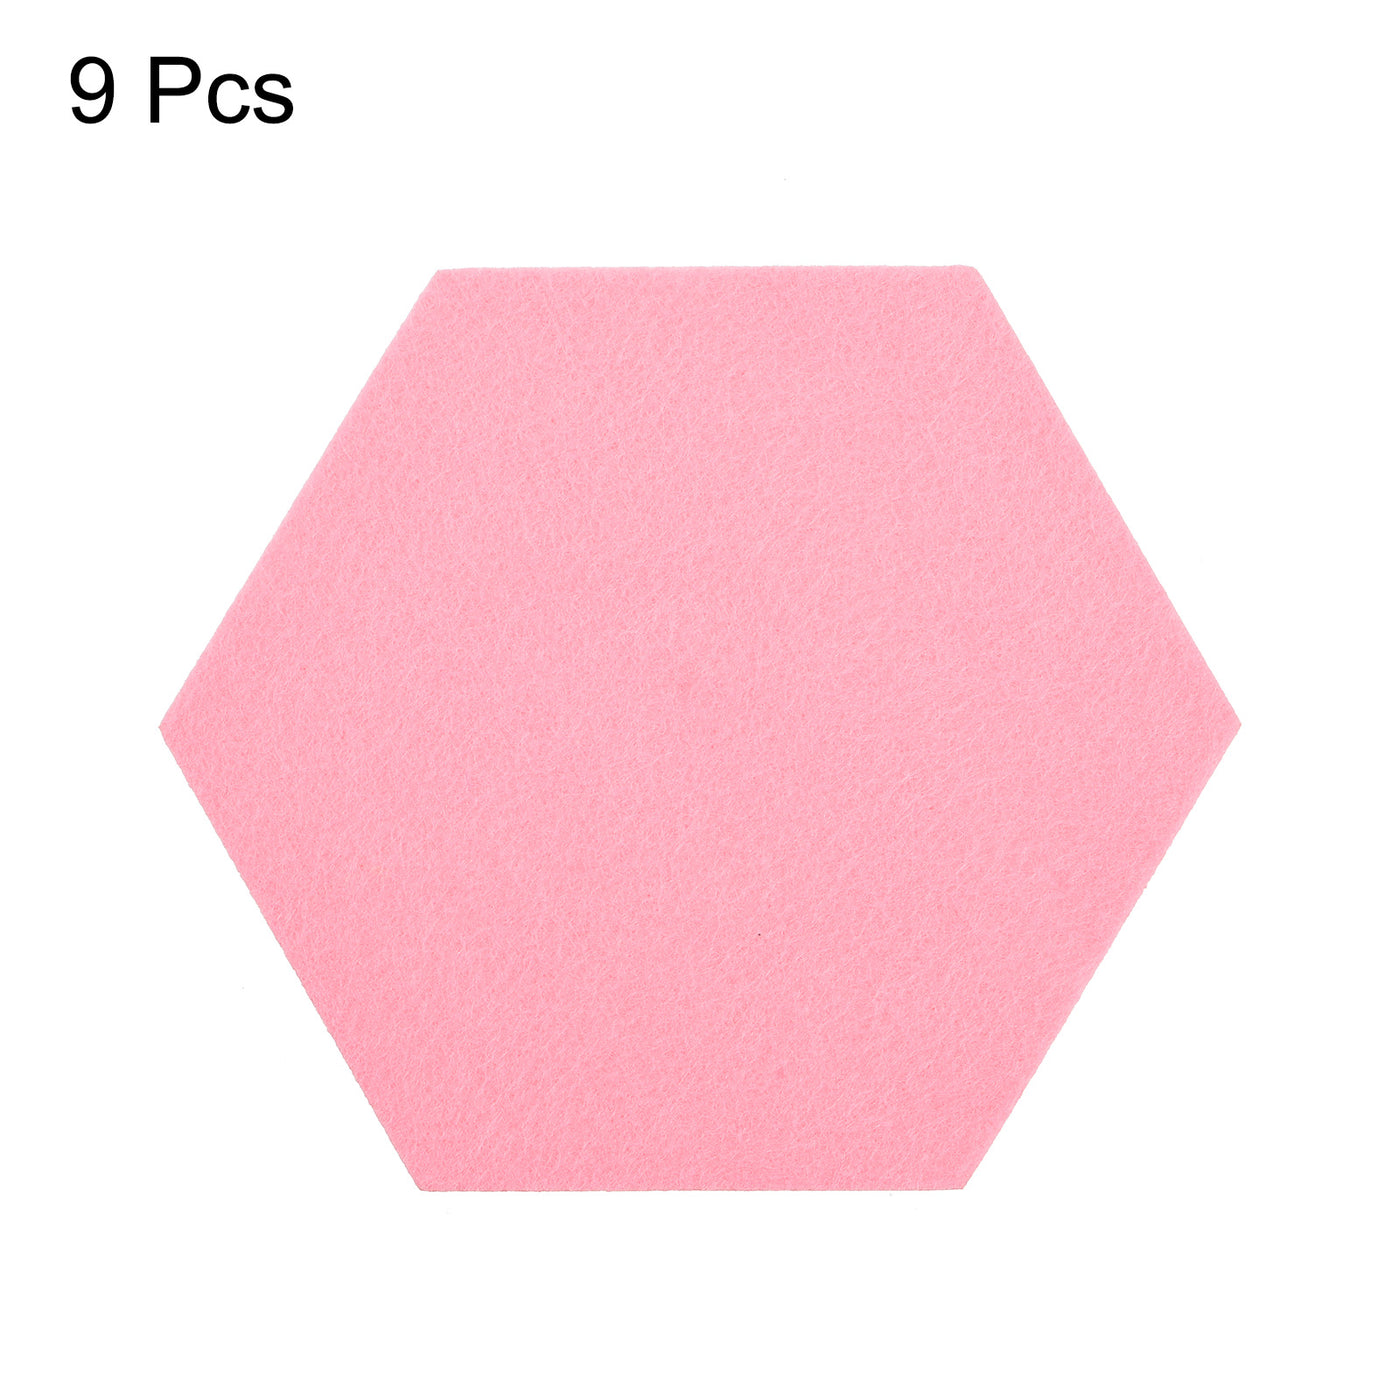 uxcell Uxcell Felt Coasters 9pcs Absorbent Pad Coaster for Drink Cup Pot Bowl Vase Pink